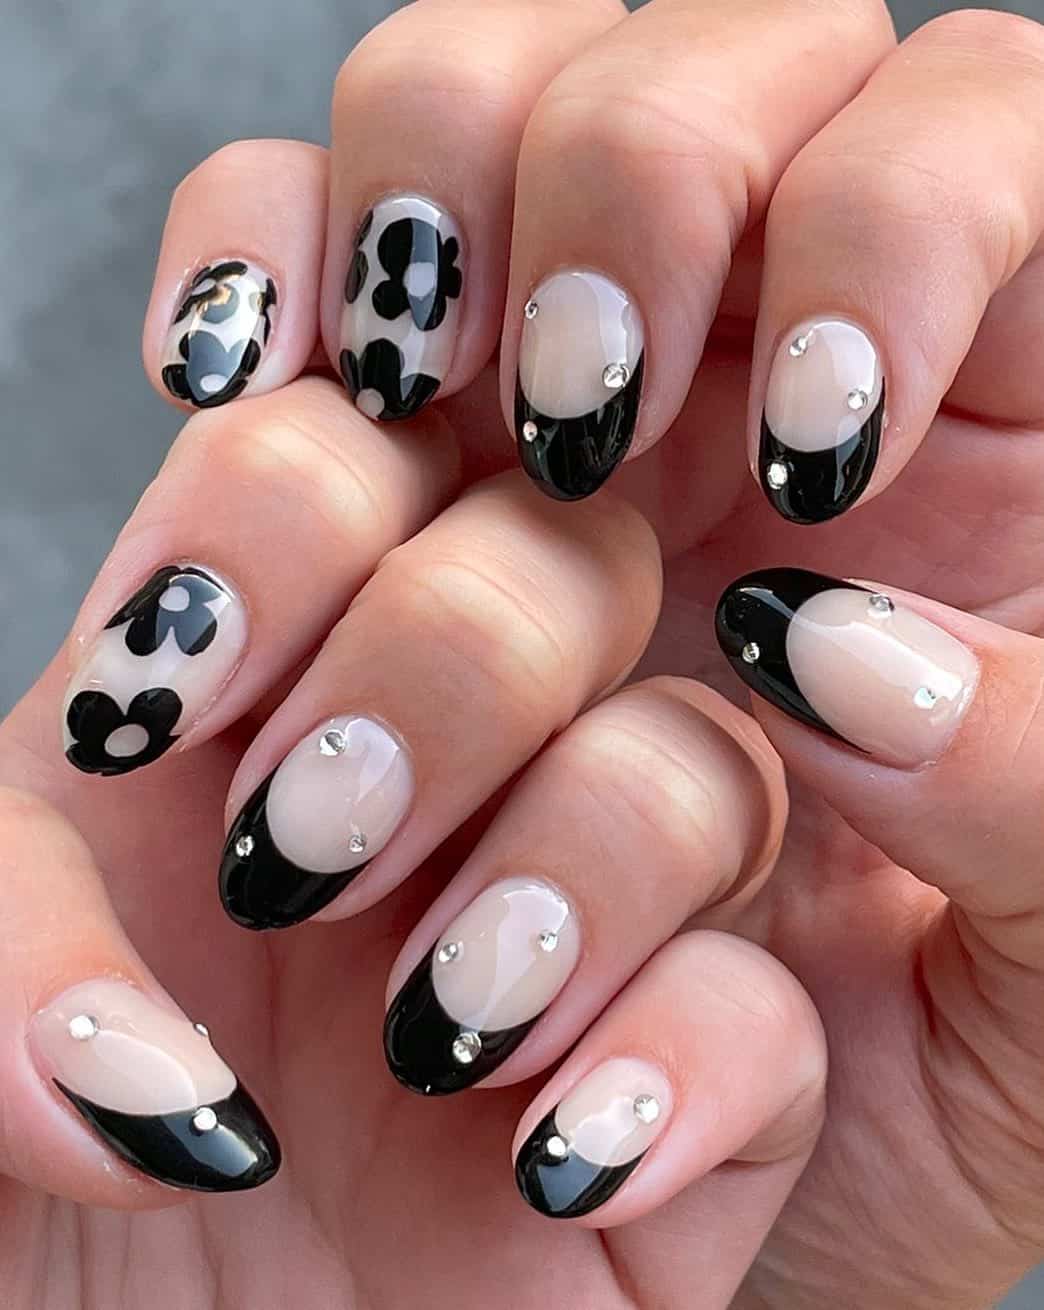 Short nude nails with black French tips, black floral art nails, and gem accents